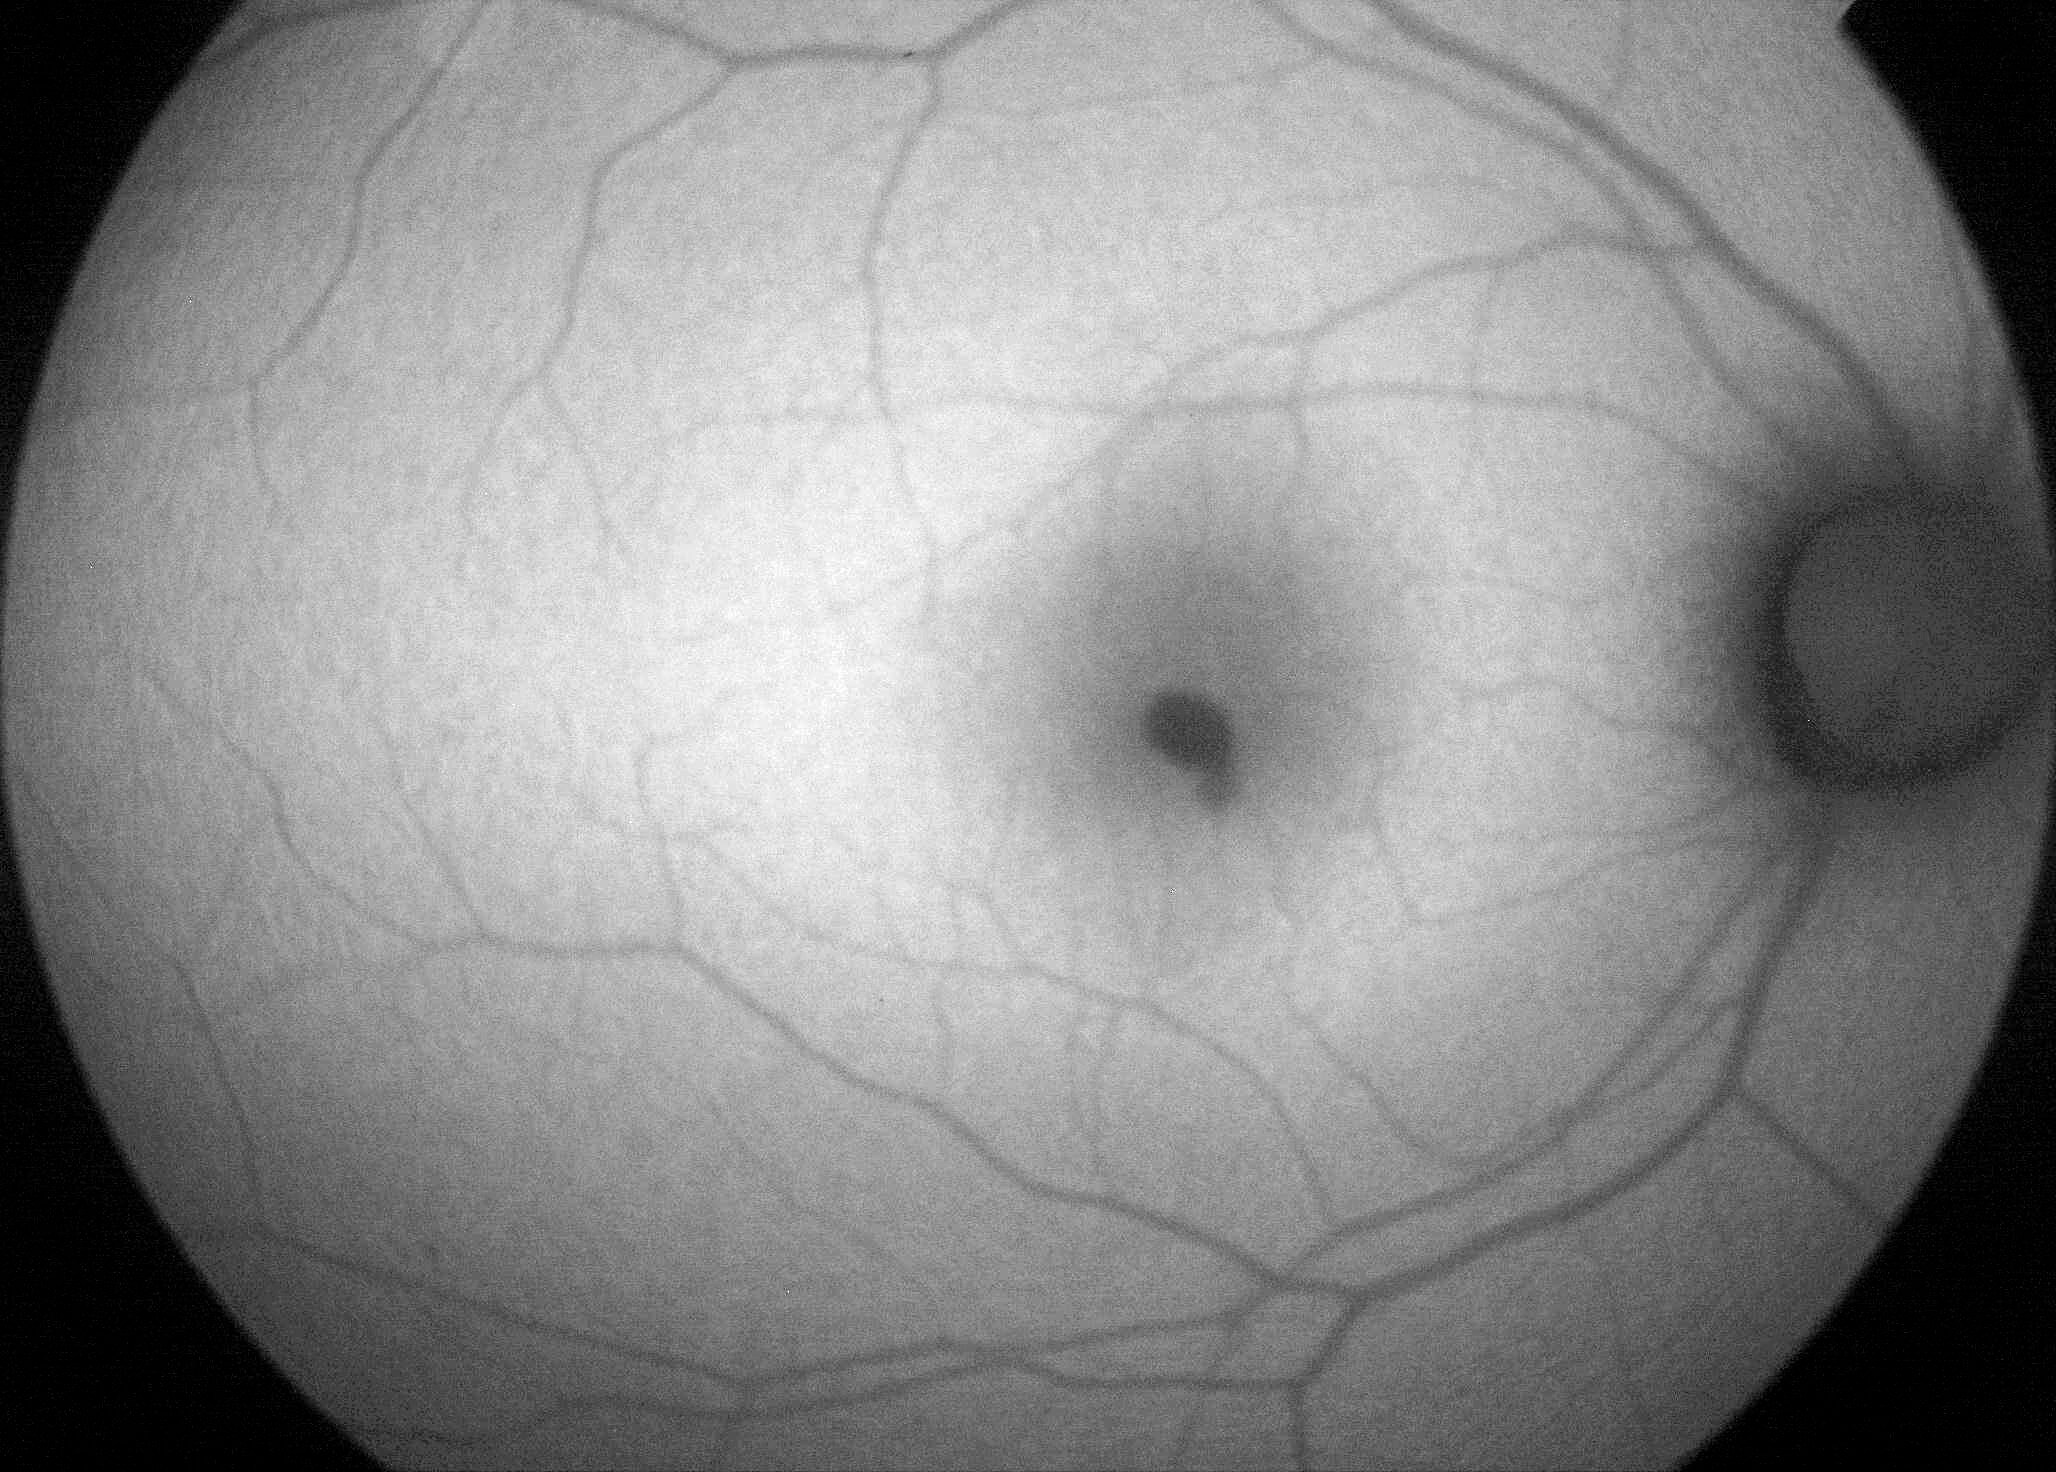 Right fundus autofluorescence imaging demonstrating hypoautofluorecence in the location of the haemorrhage, due to blocking of normal retinal pigment epithelial hyperautofluorescence.